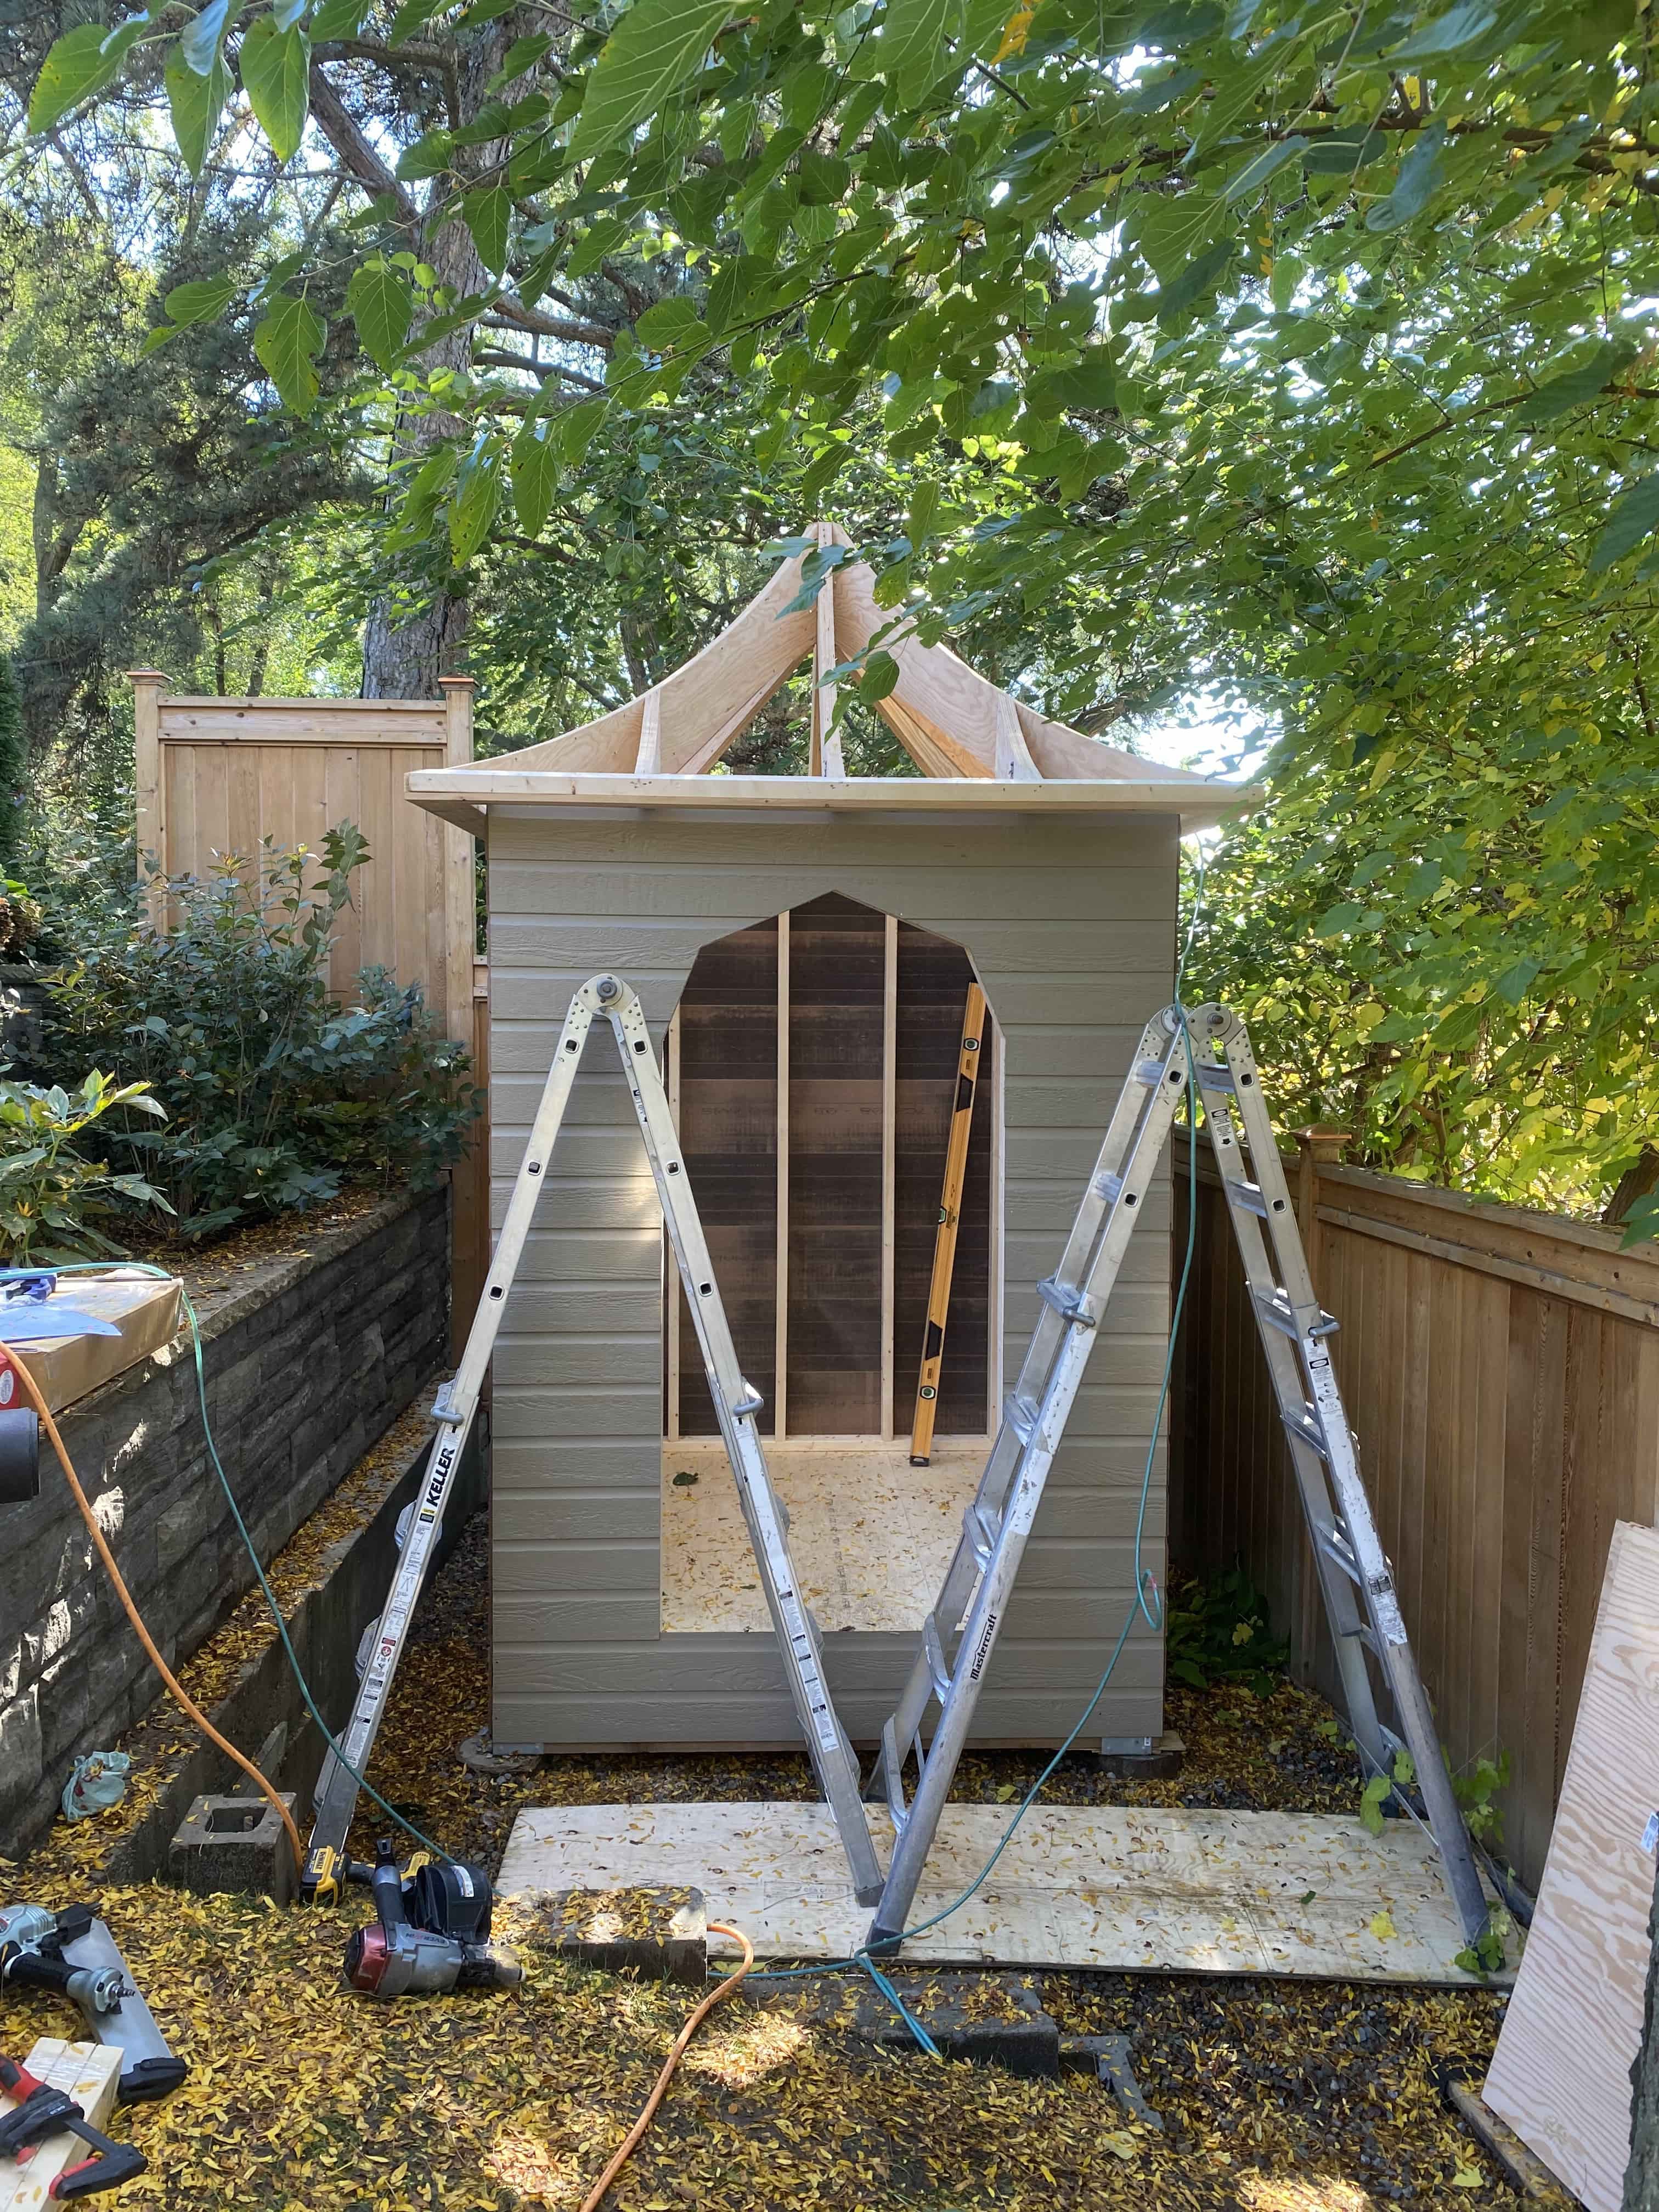 Construction view of 6’ x 6' Melbourne Garden Shed located in Toronto, Ontario – Summerwood Prod